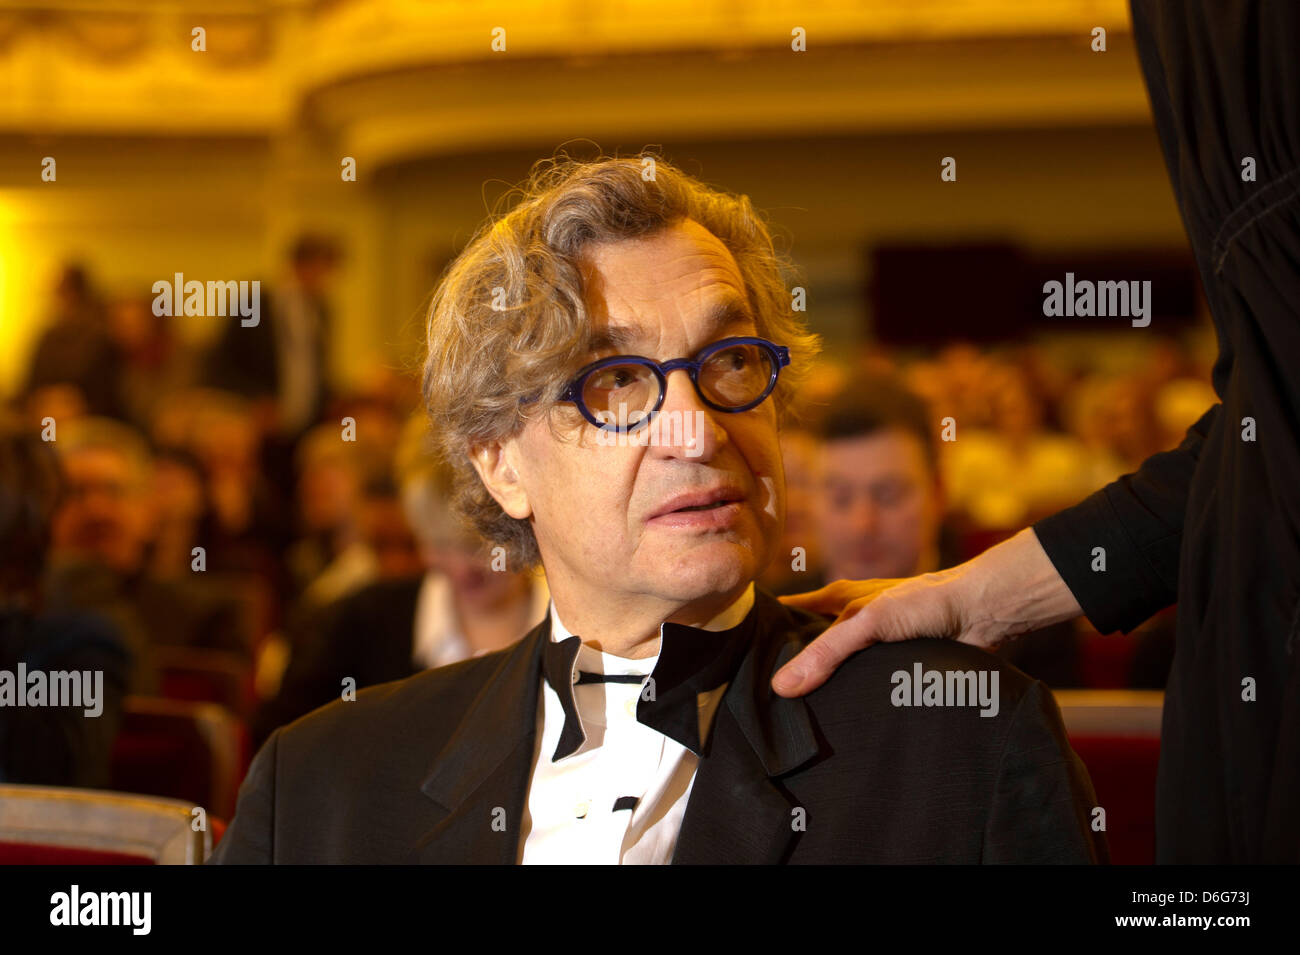 German director Wim Wenders attend the award ceremony of the gives the 3rd international peace prize, the Dresden Prize, to American documentary photographer James Nachtwey at the Semper Opera in Dresden, Germany, 11 February 2012. Photo: ARNO BURGI Stock Photo